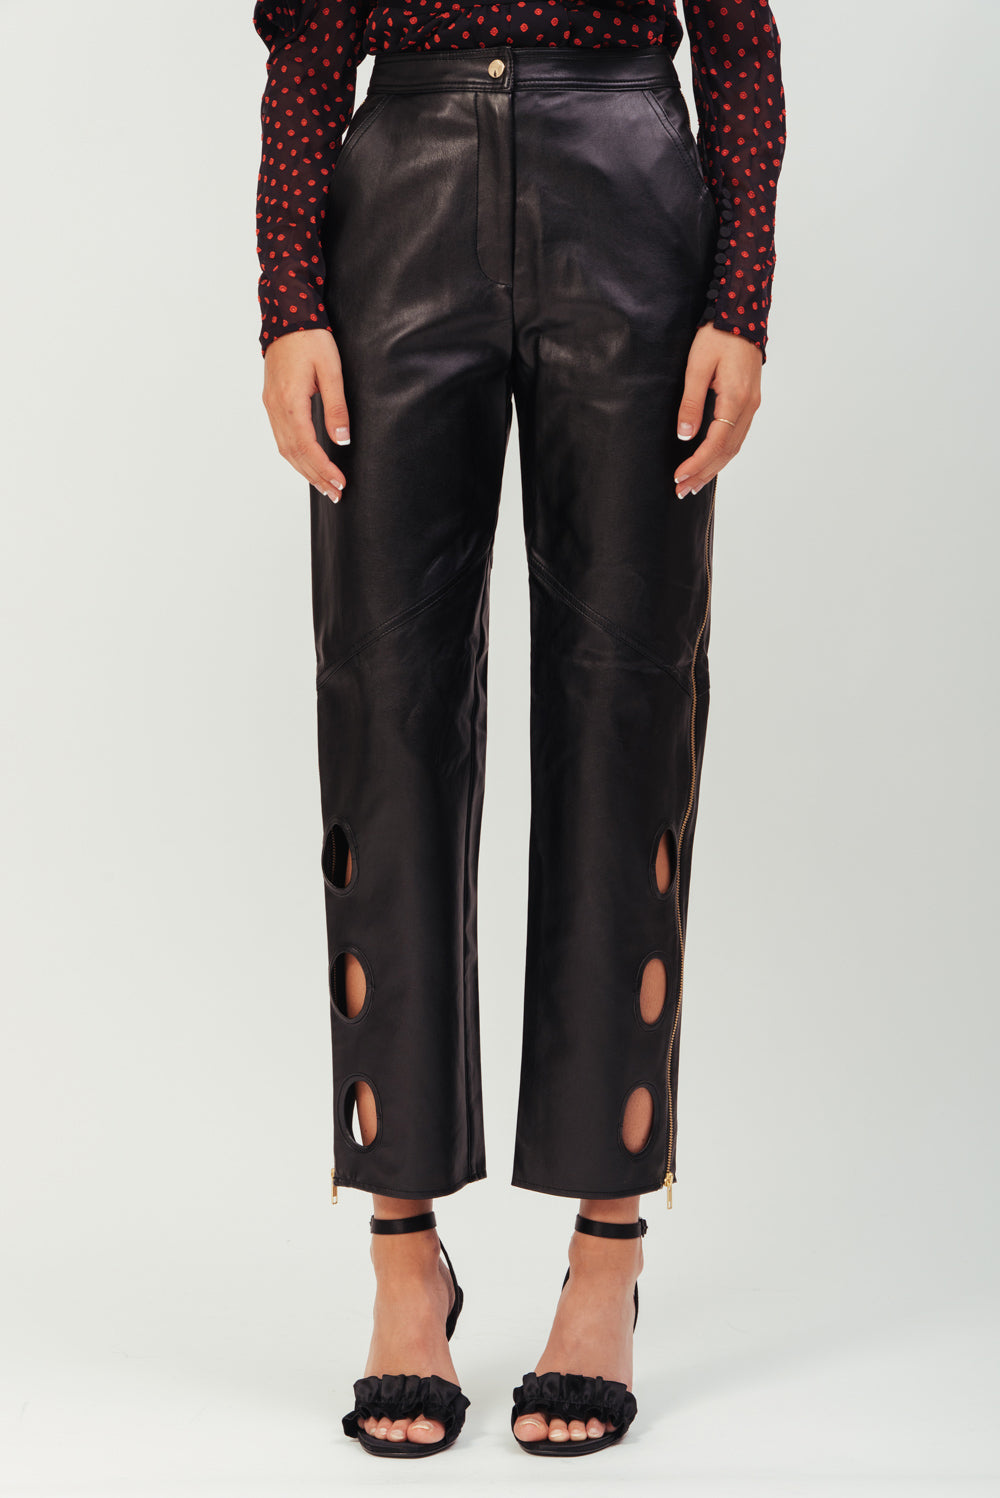 BLACK EYELET TROUSER FAUX LEATHER SP19-005F